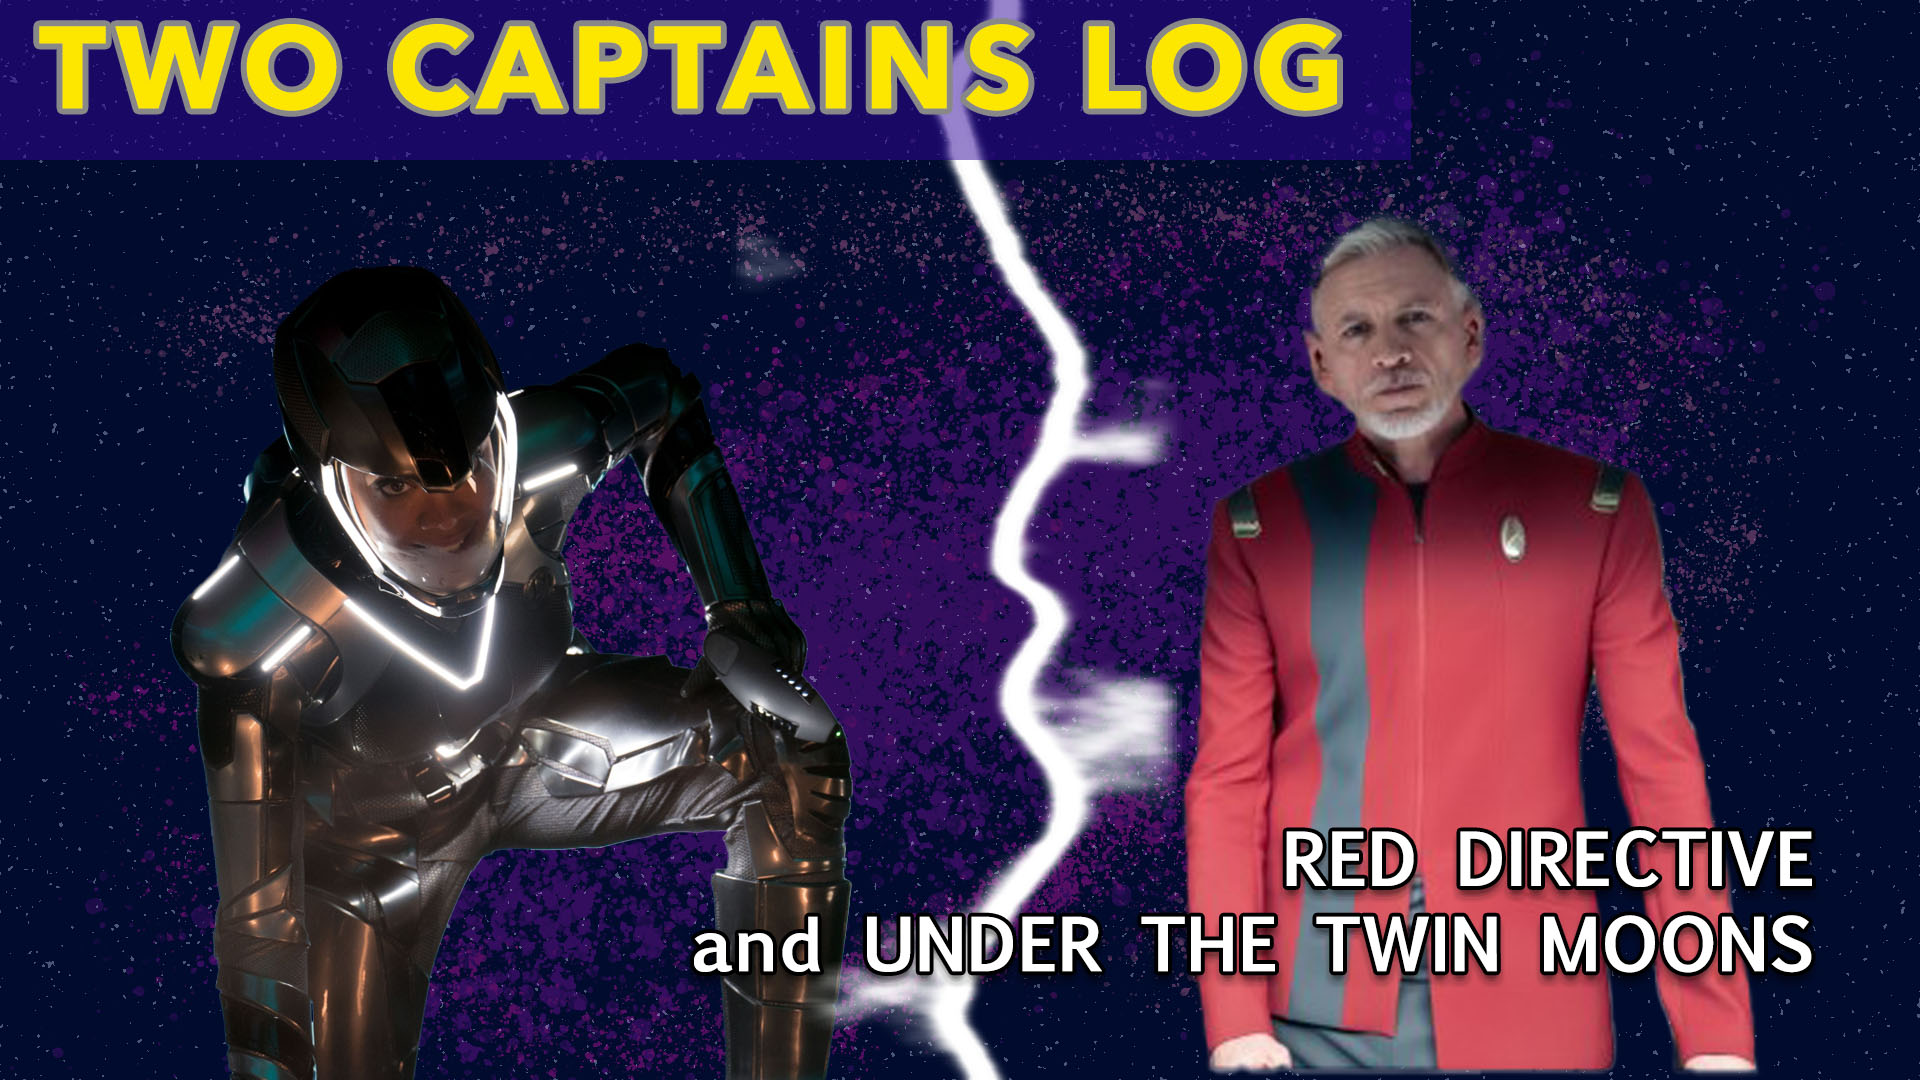 Two Captains Log: Star Trek: Discovery S5E1&2 – “Red Directive” and “Under the Twin Moons” Review